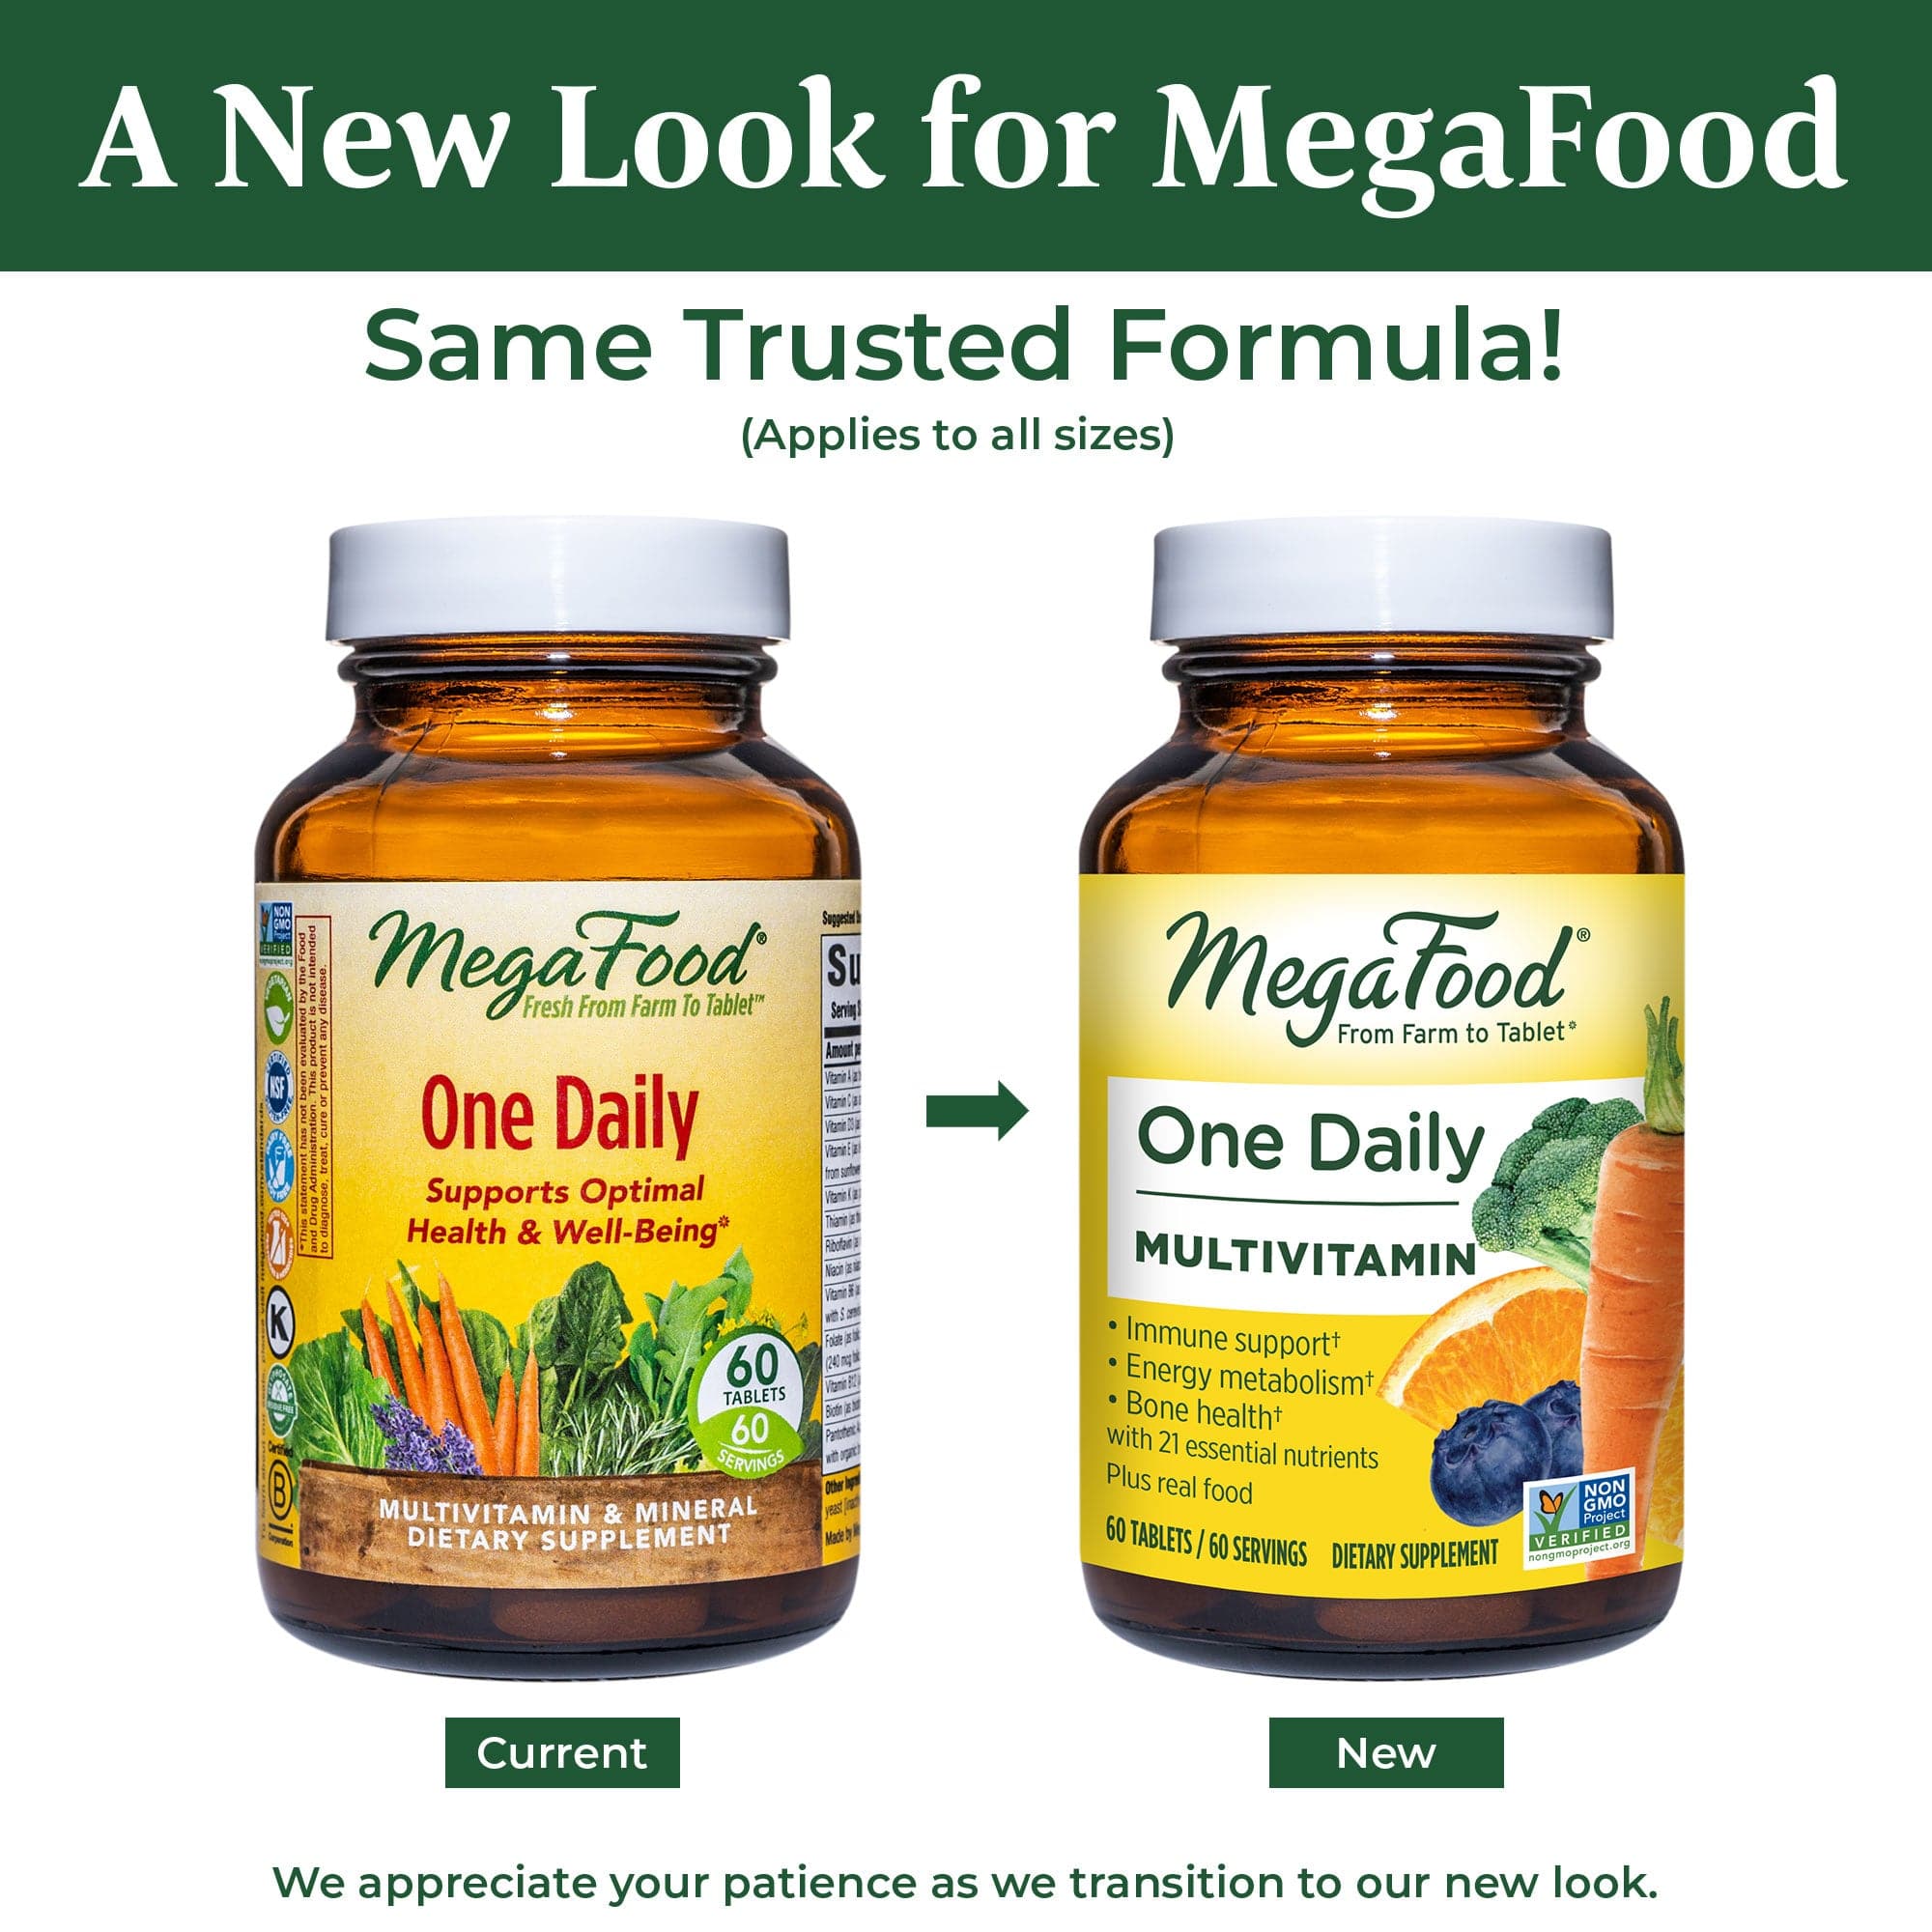 MegaFood One Daily Multivitamin